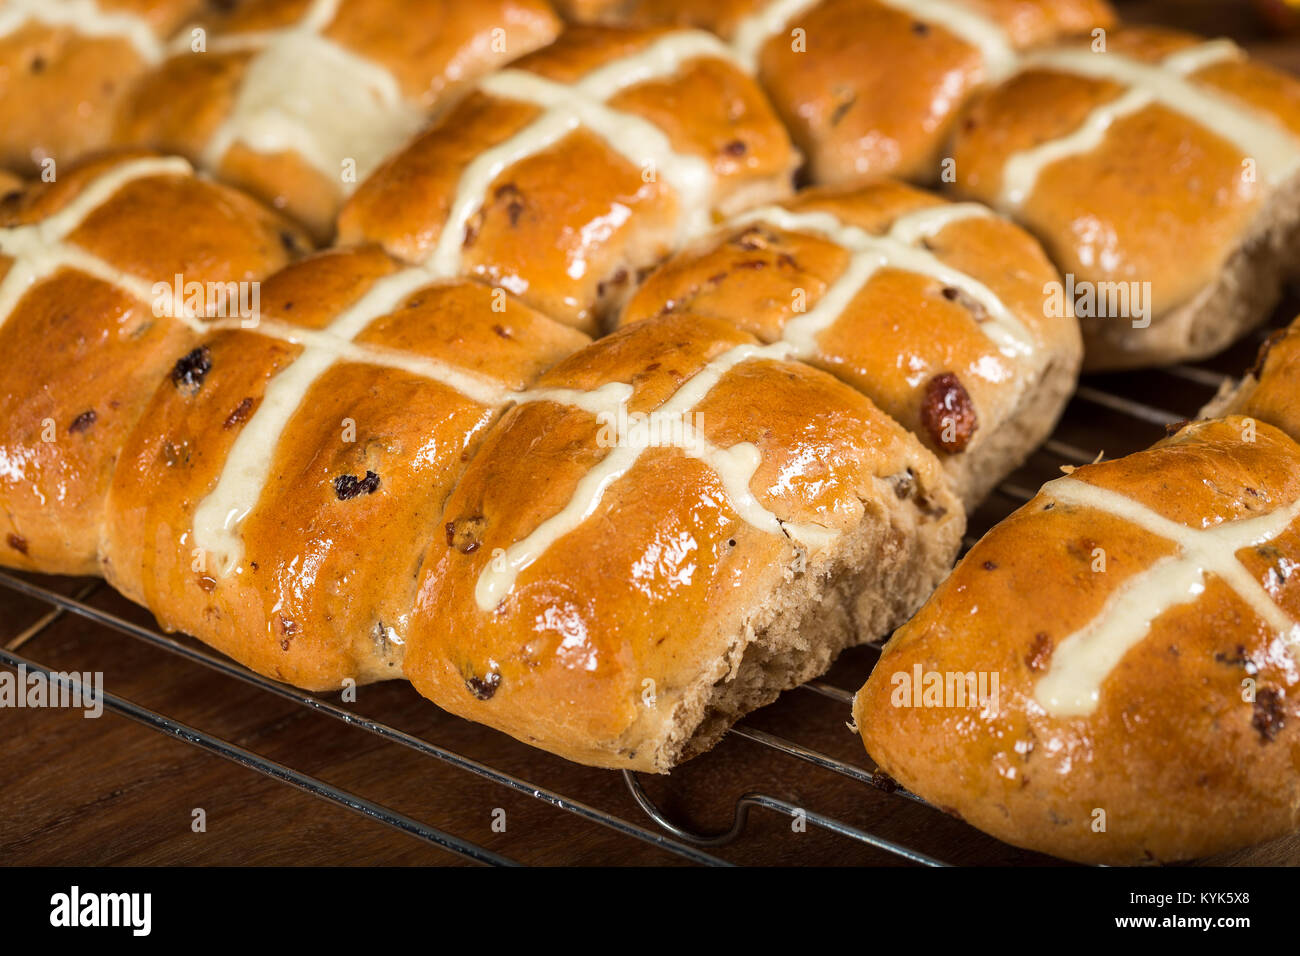 Homemade fresh from the oven Hot Cross Buns on cooling rack Stock Photo